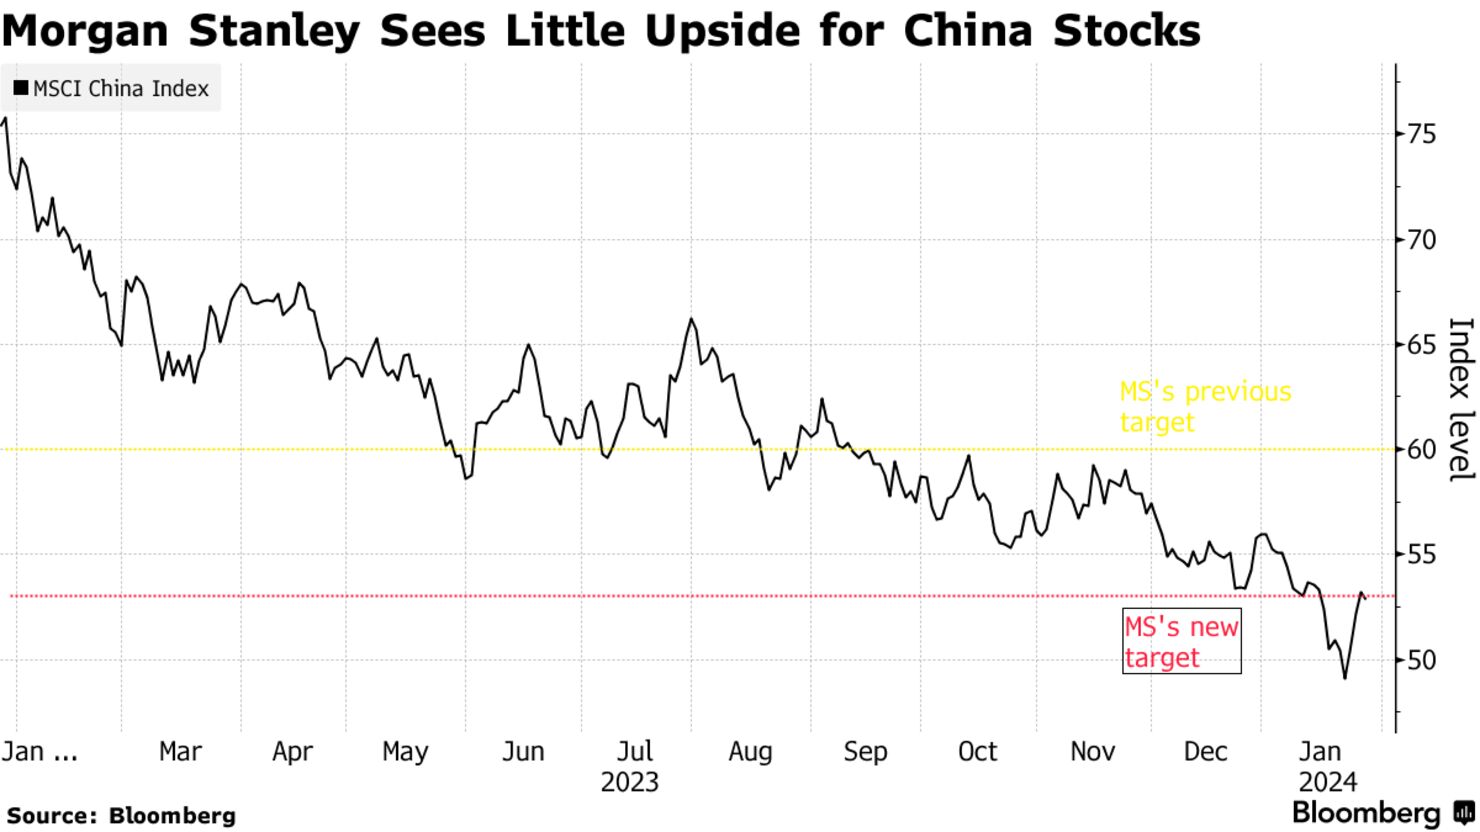 Morgan Stanley Sees Little Upside for China Stocks